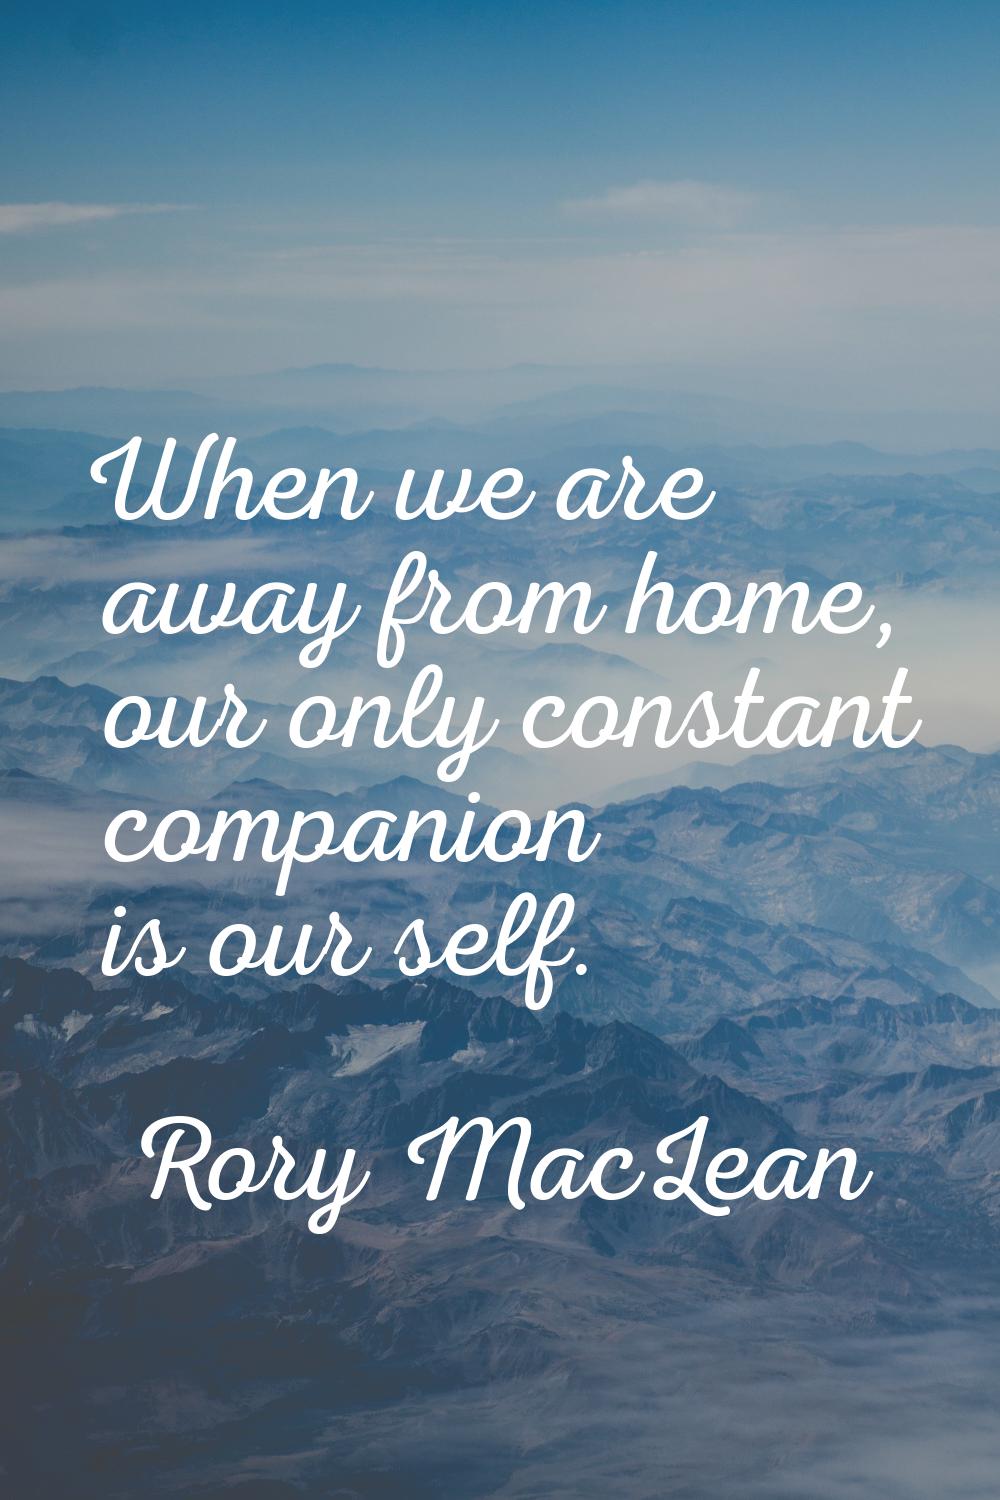 When we are away from home, our only constant companion is our self.